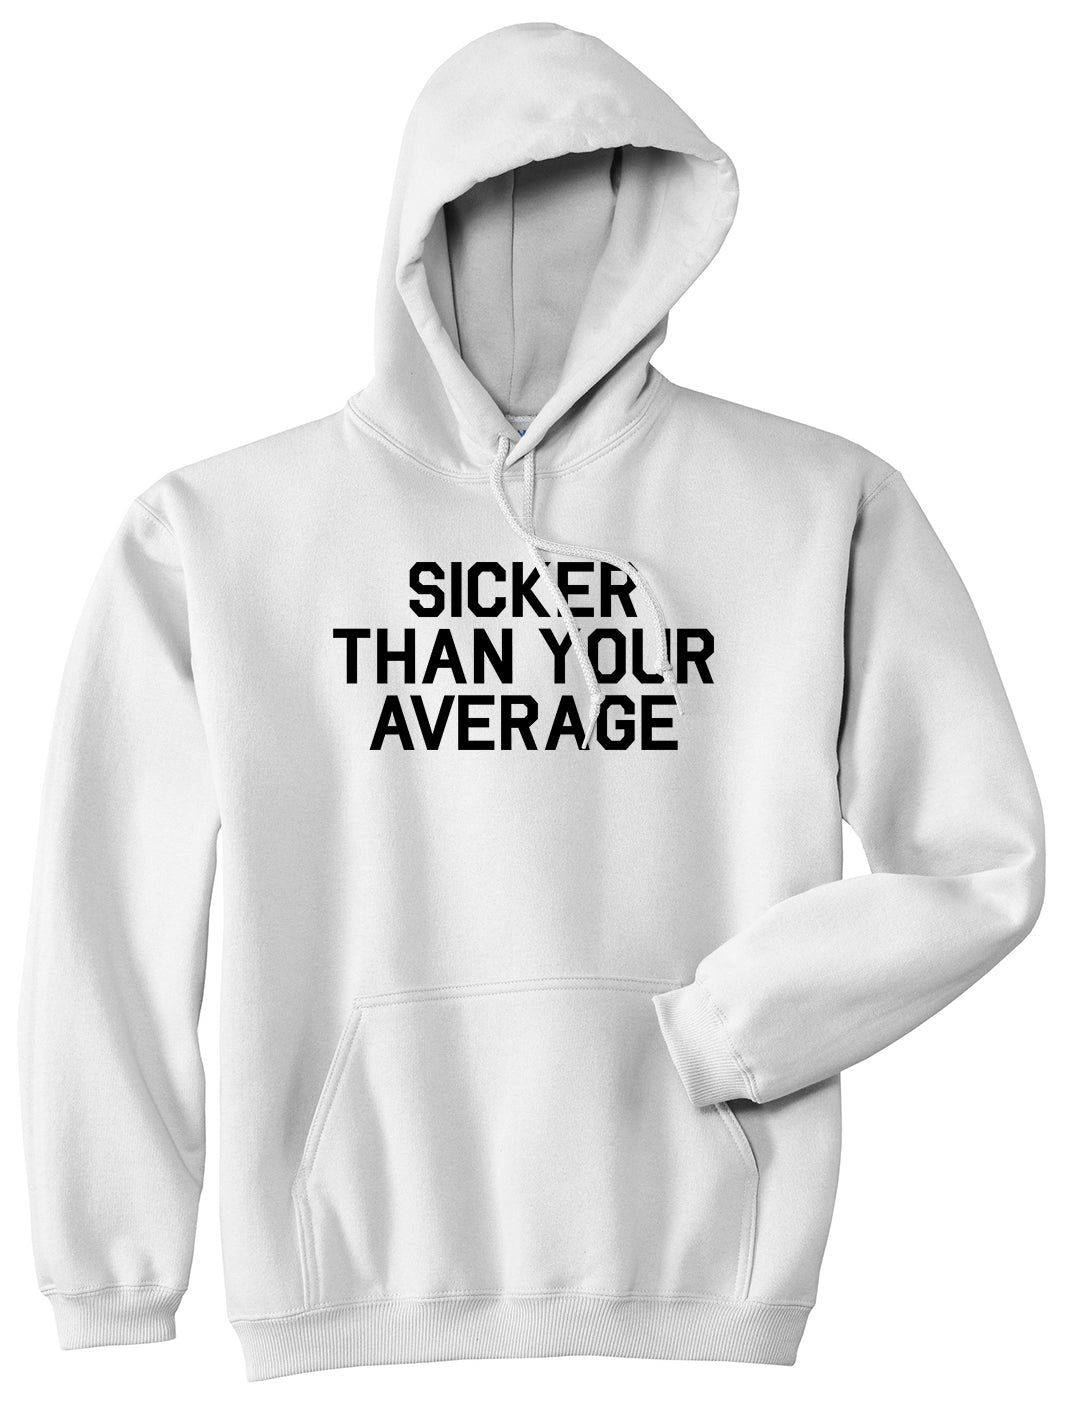 Sicker Than Your Average Pullover Hoodie in White